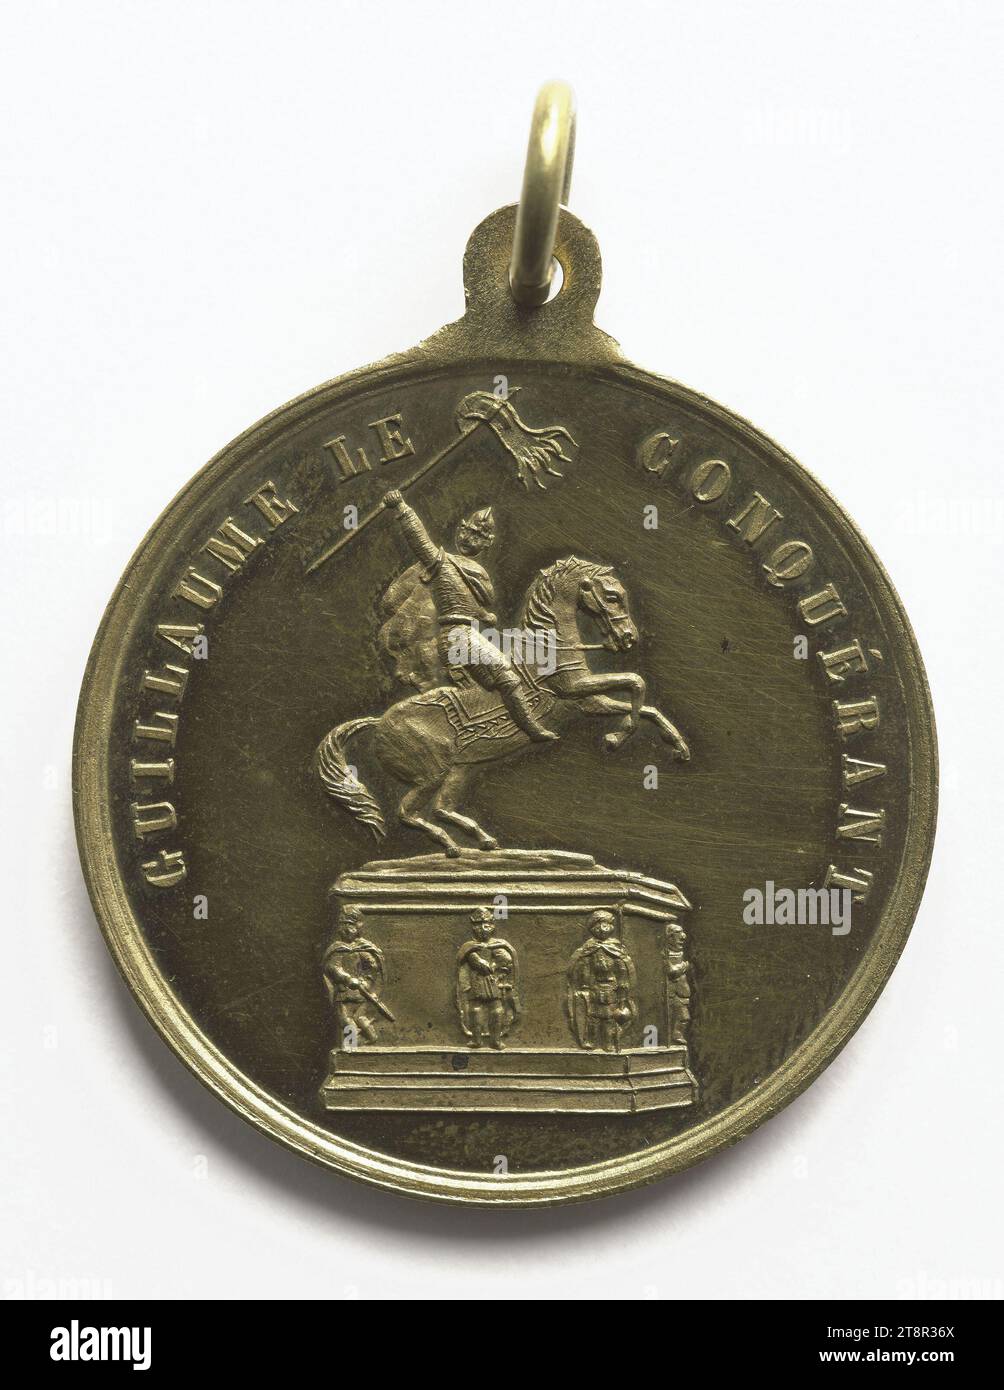 Musical contest and inauguration of the six statues of the dukes of Normandy in Falaise, September 19 and 20, 1875, In 1875, Numismatic, Medal, Copper, Dimensions - Work: Diameter: 3.5 cm, Weight (type dimension): 14.41 g Stock Photo